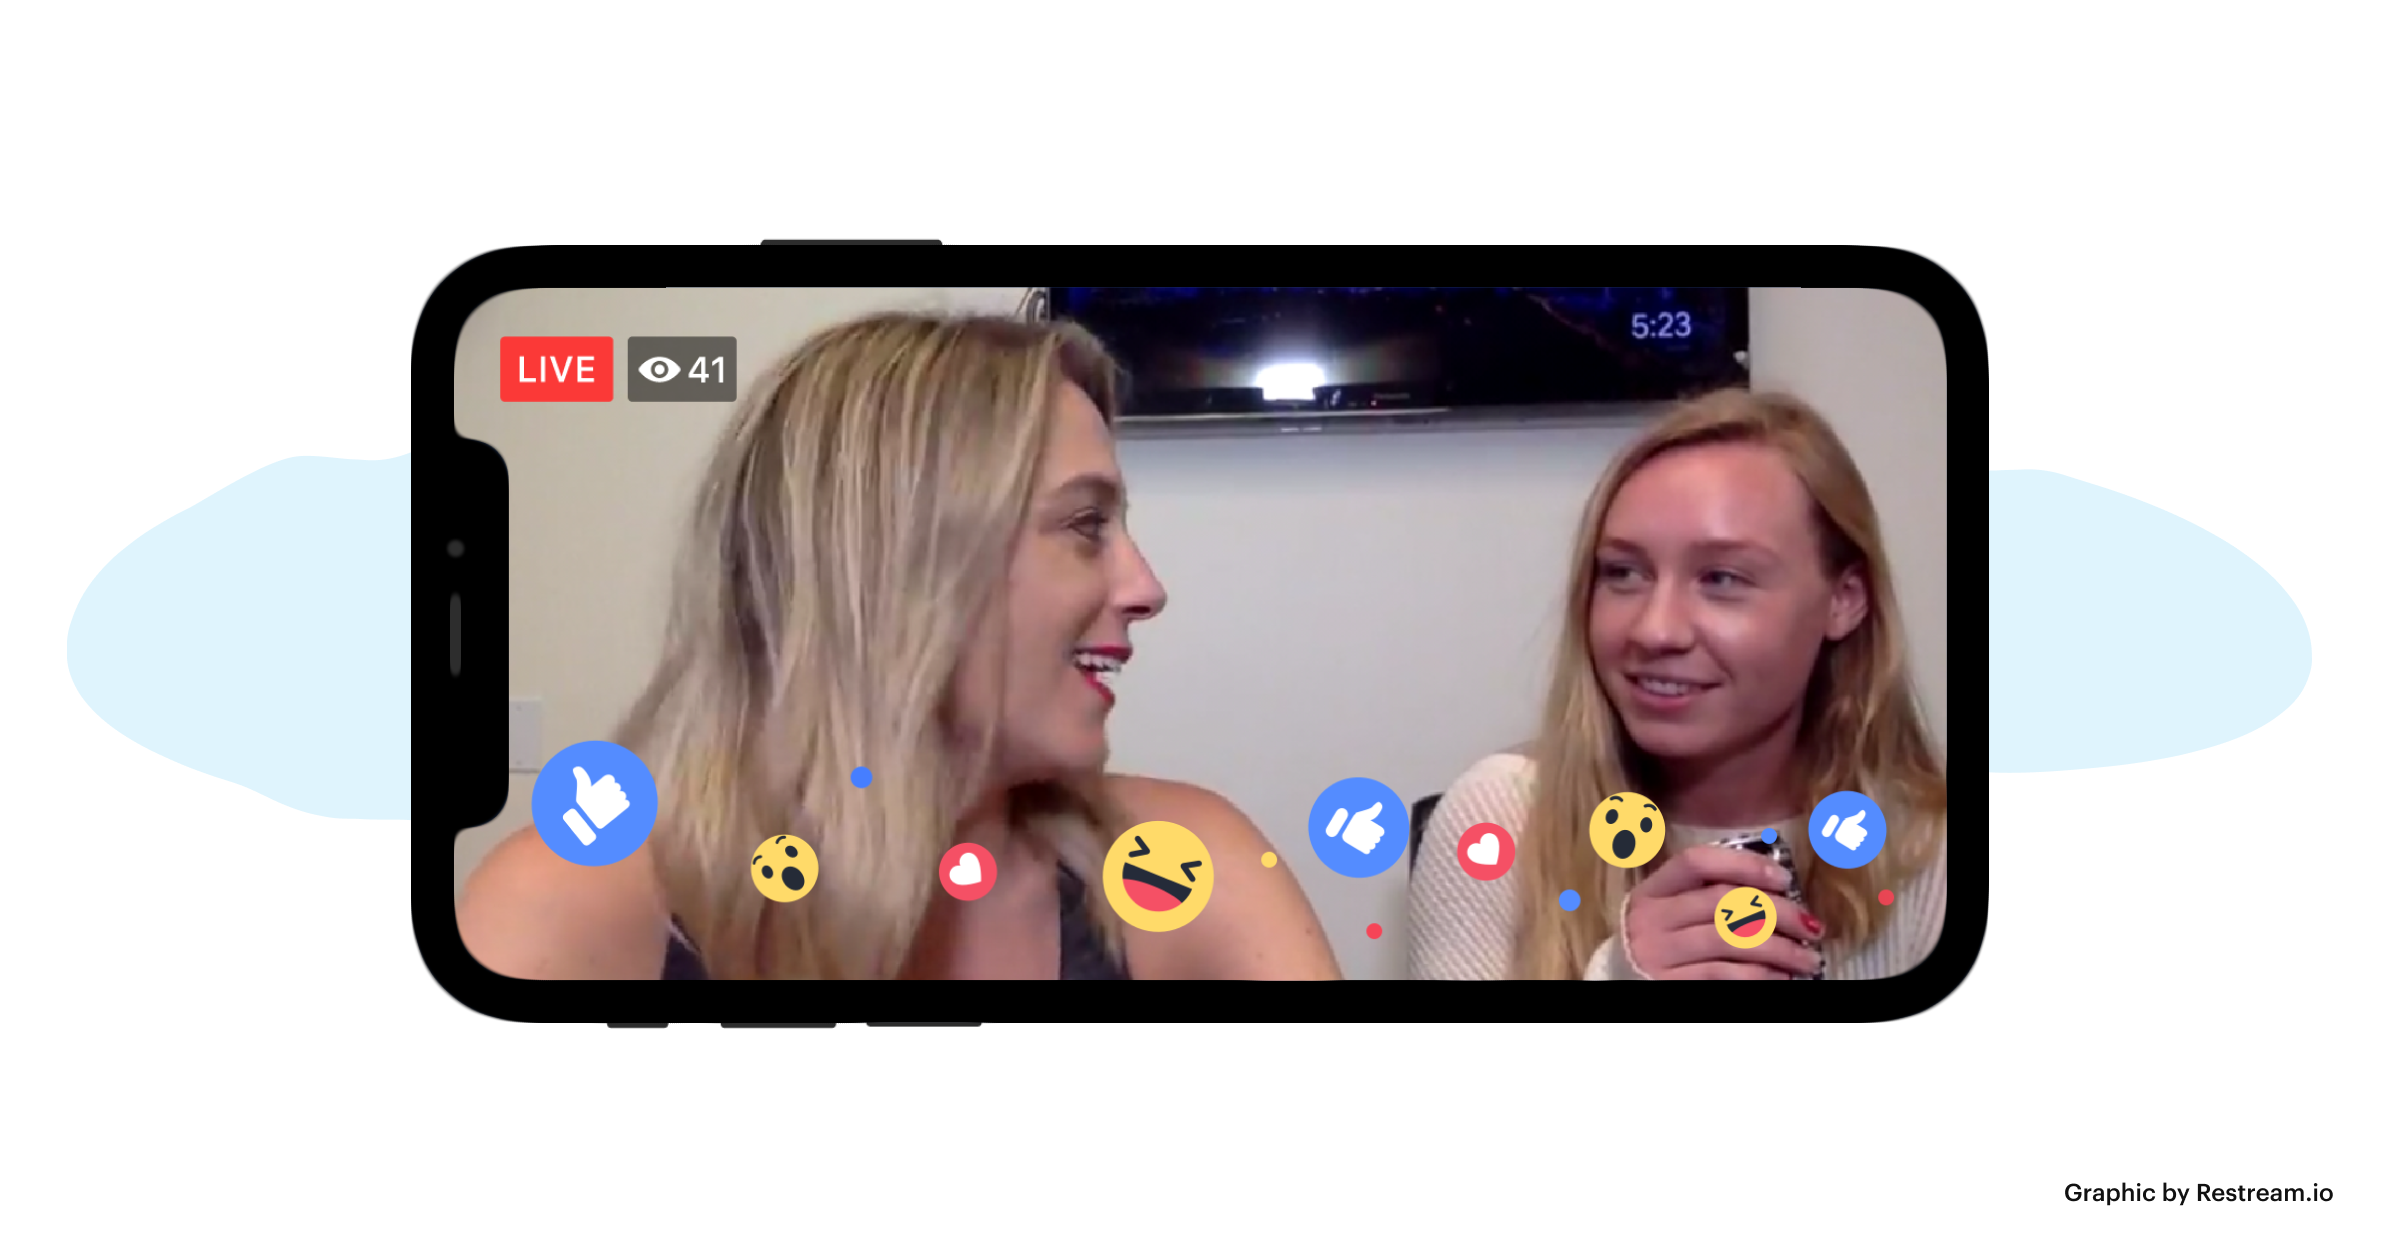 Facebook Live on the iPhone XS